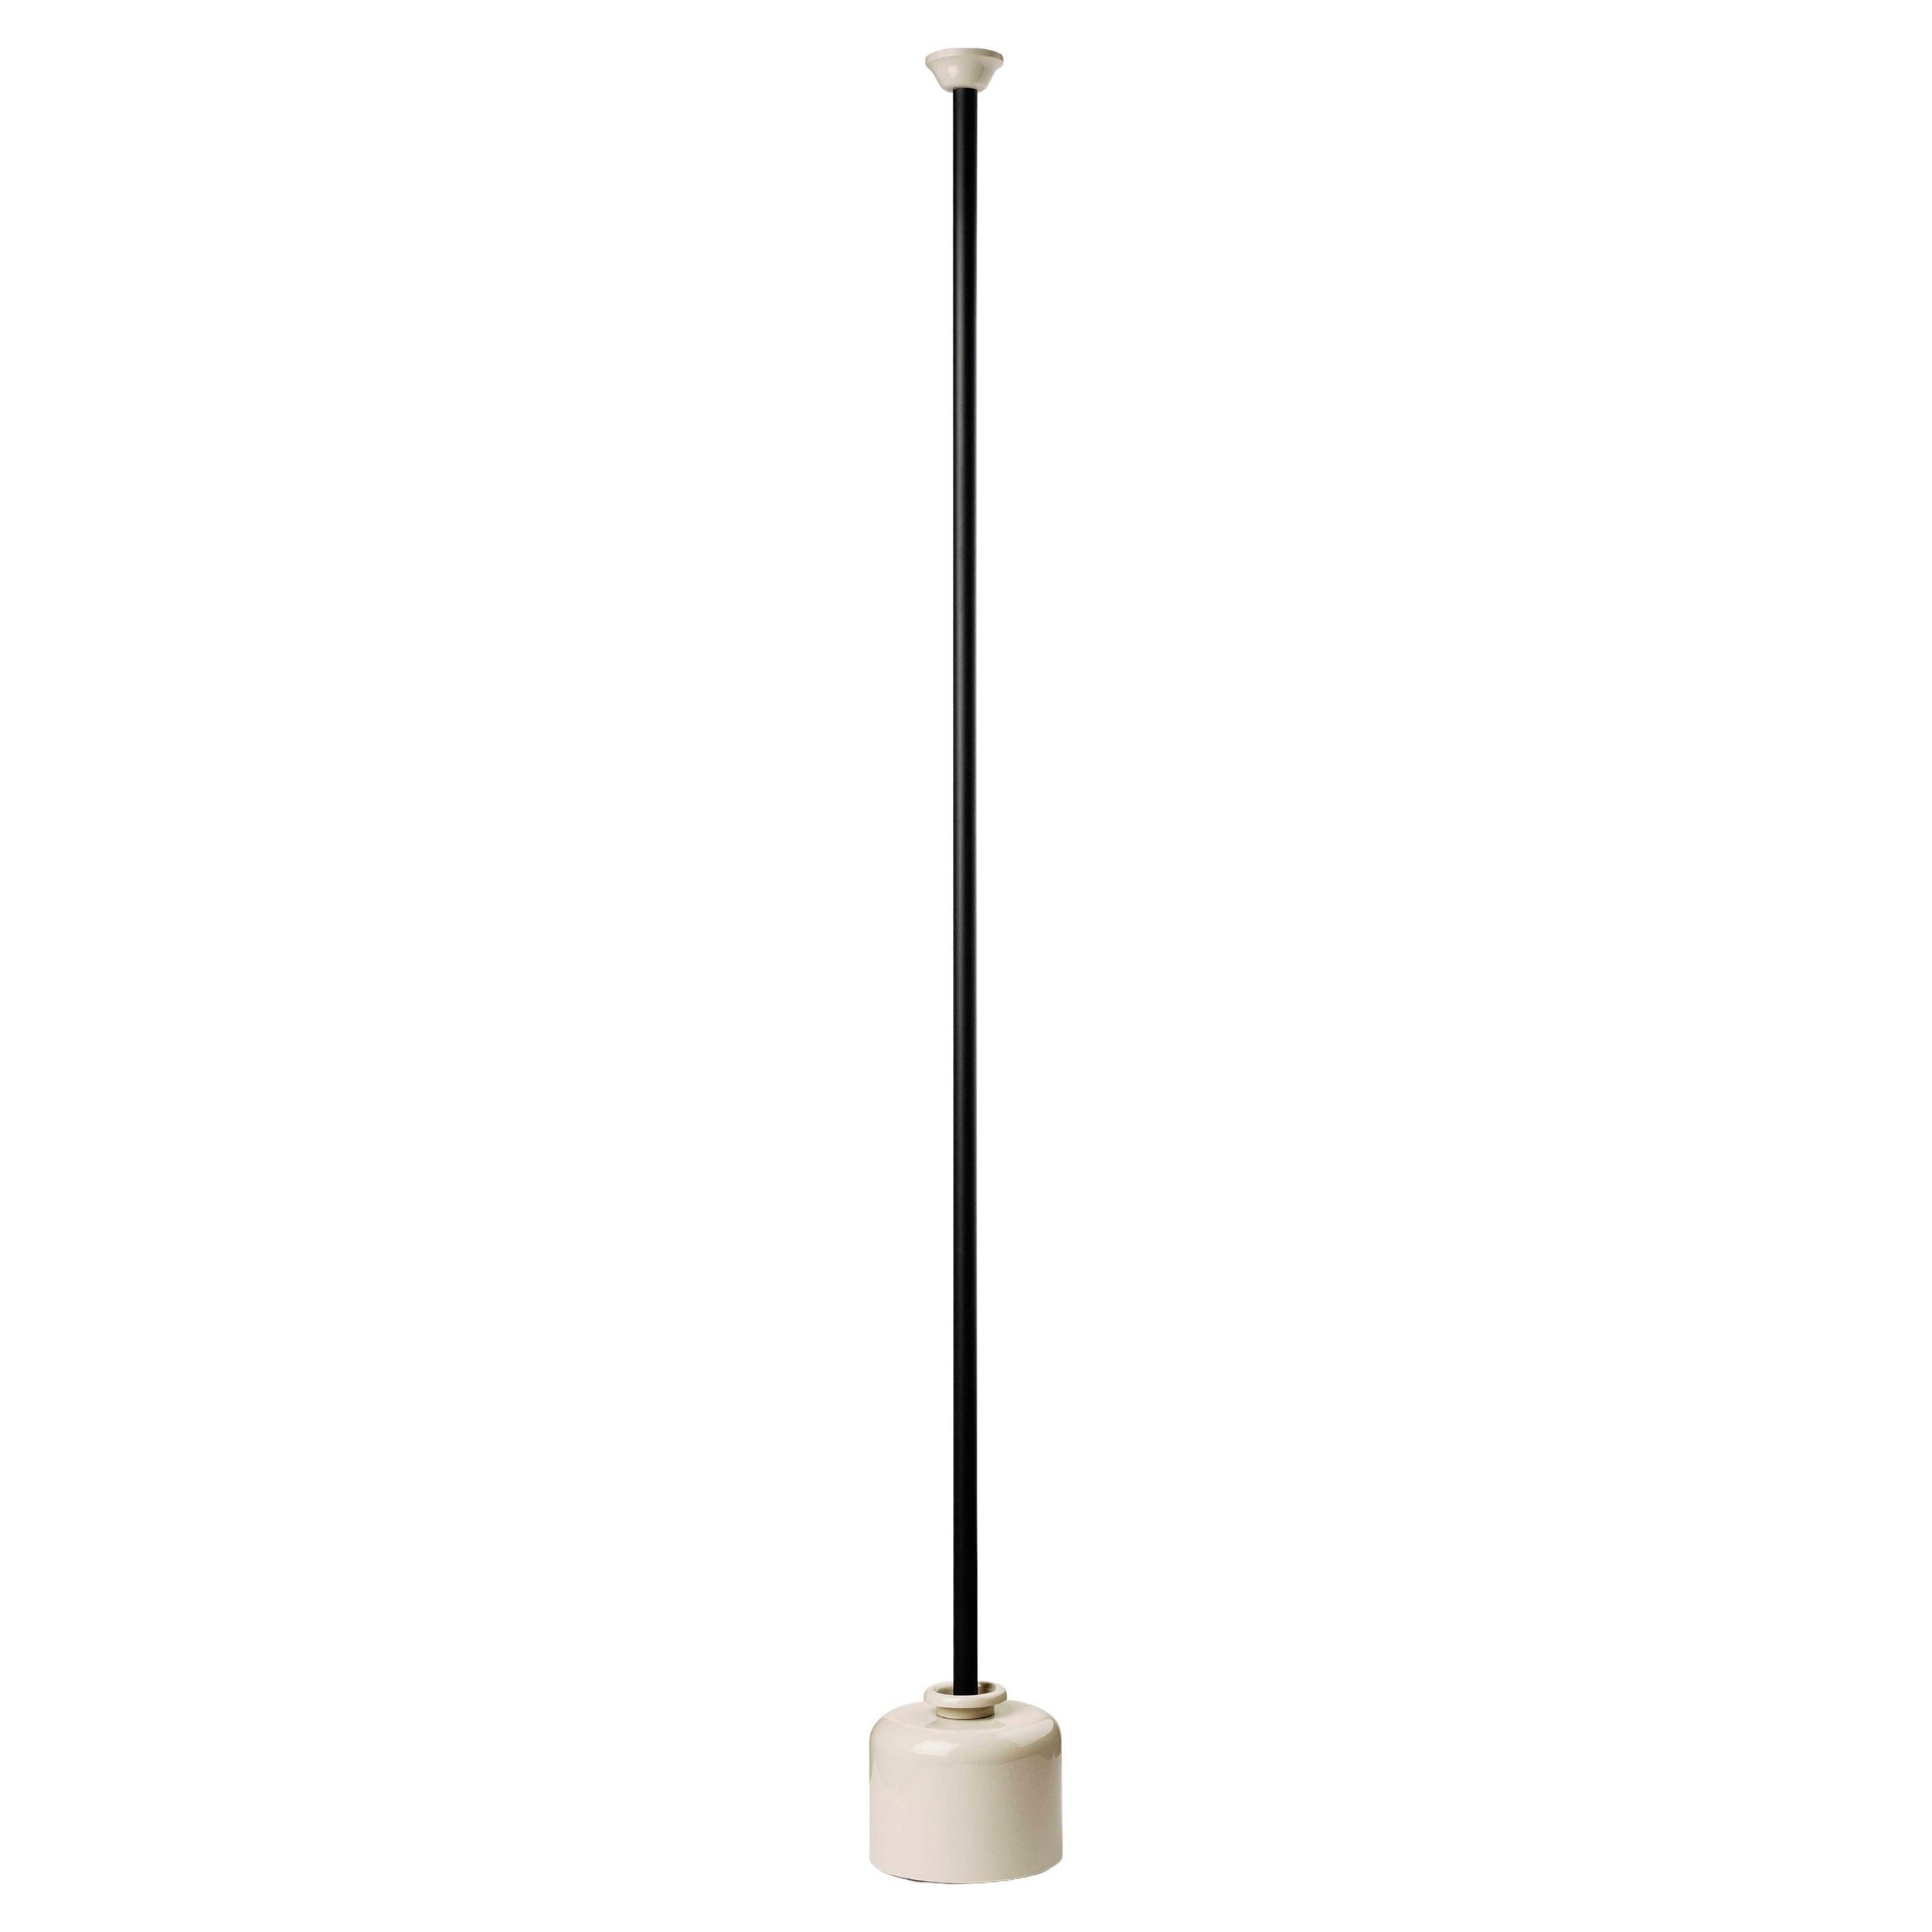 Gino Sarfatti Model 1095 Floor Lamp for Astep For Sale